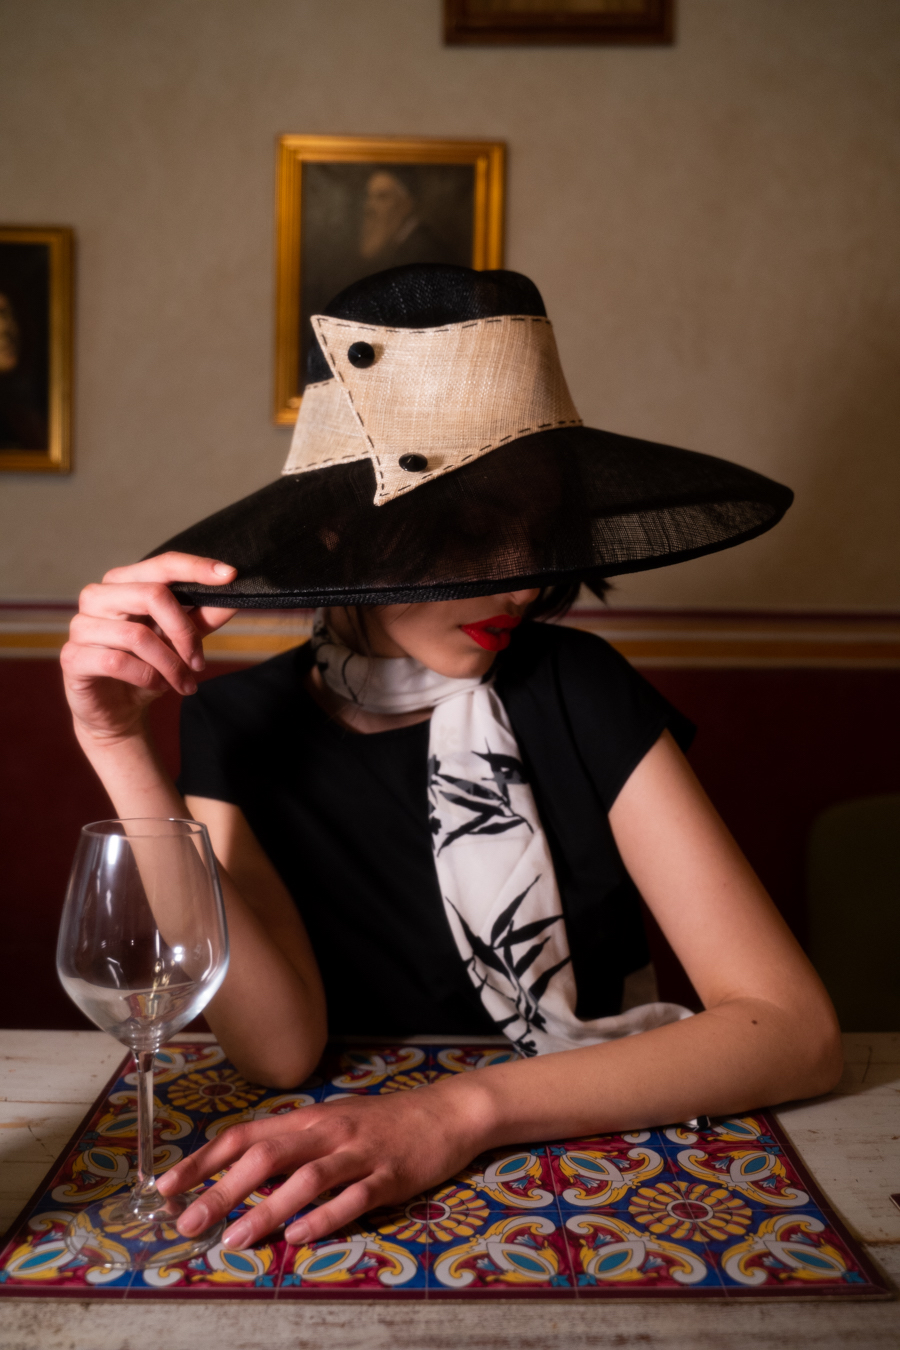 Marzi Hats: A Florentine Legacy in the 21st Century